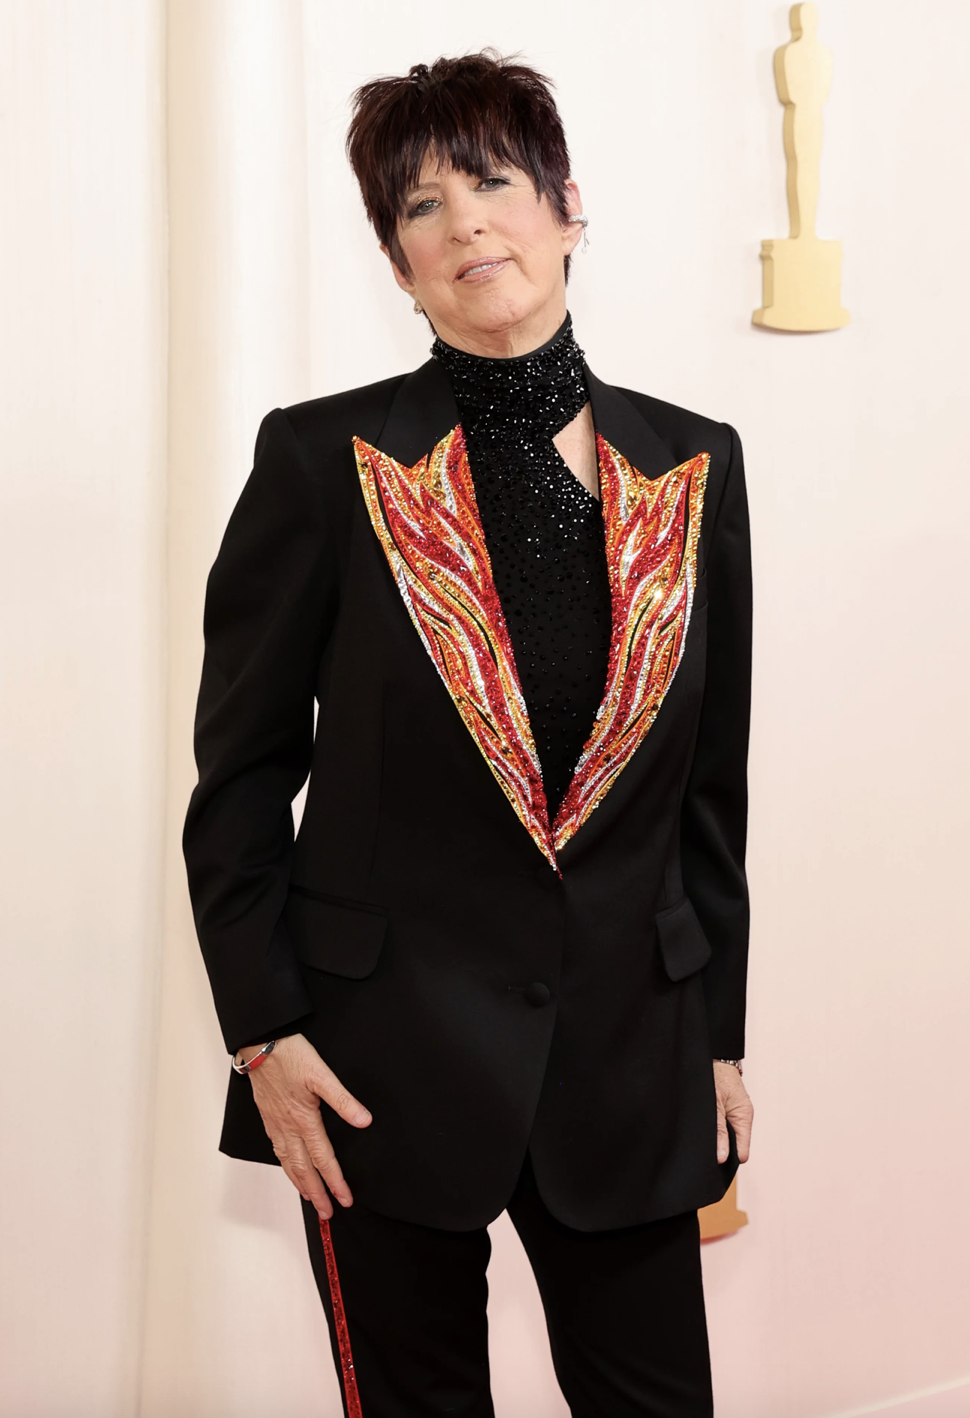 A woman with short dark hair stands wearing a black shirt and suit with red detailing on the lapels.